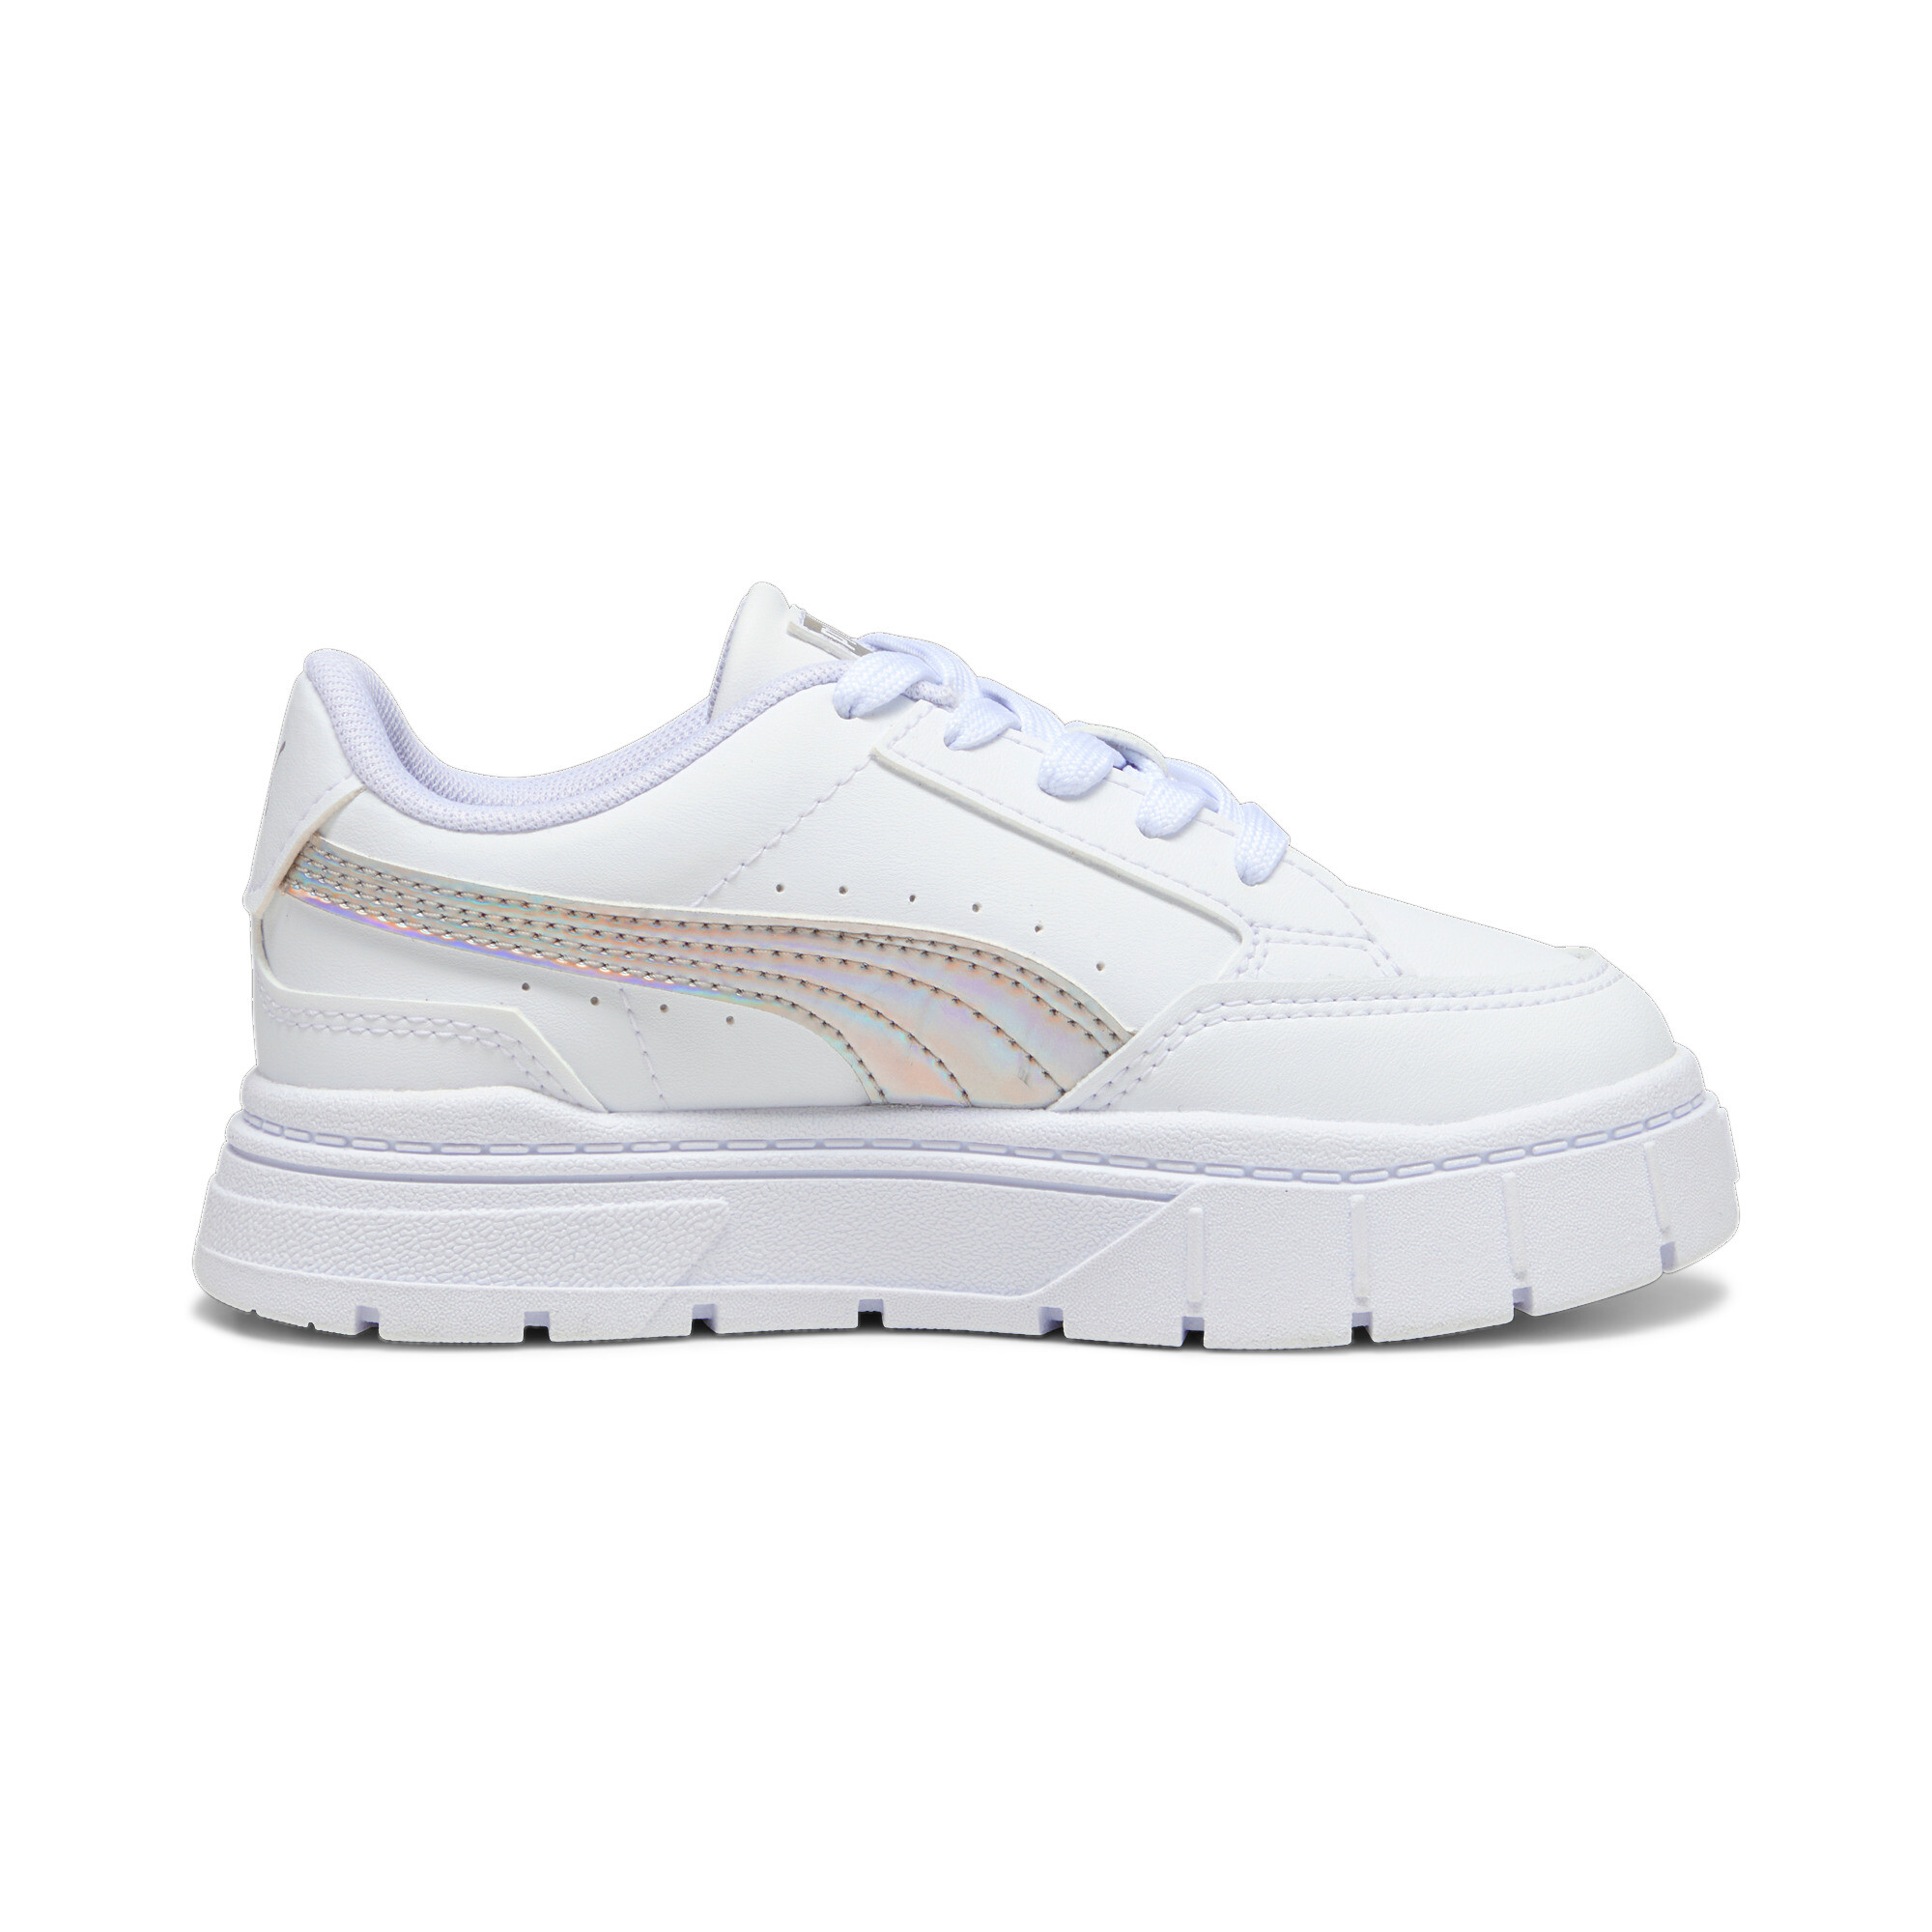 Puma Mayze Stack Iridescent Kids' Sneakers, White, Size 30, Shoes